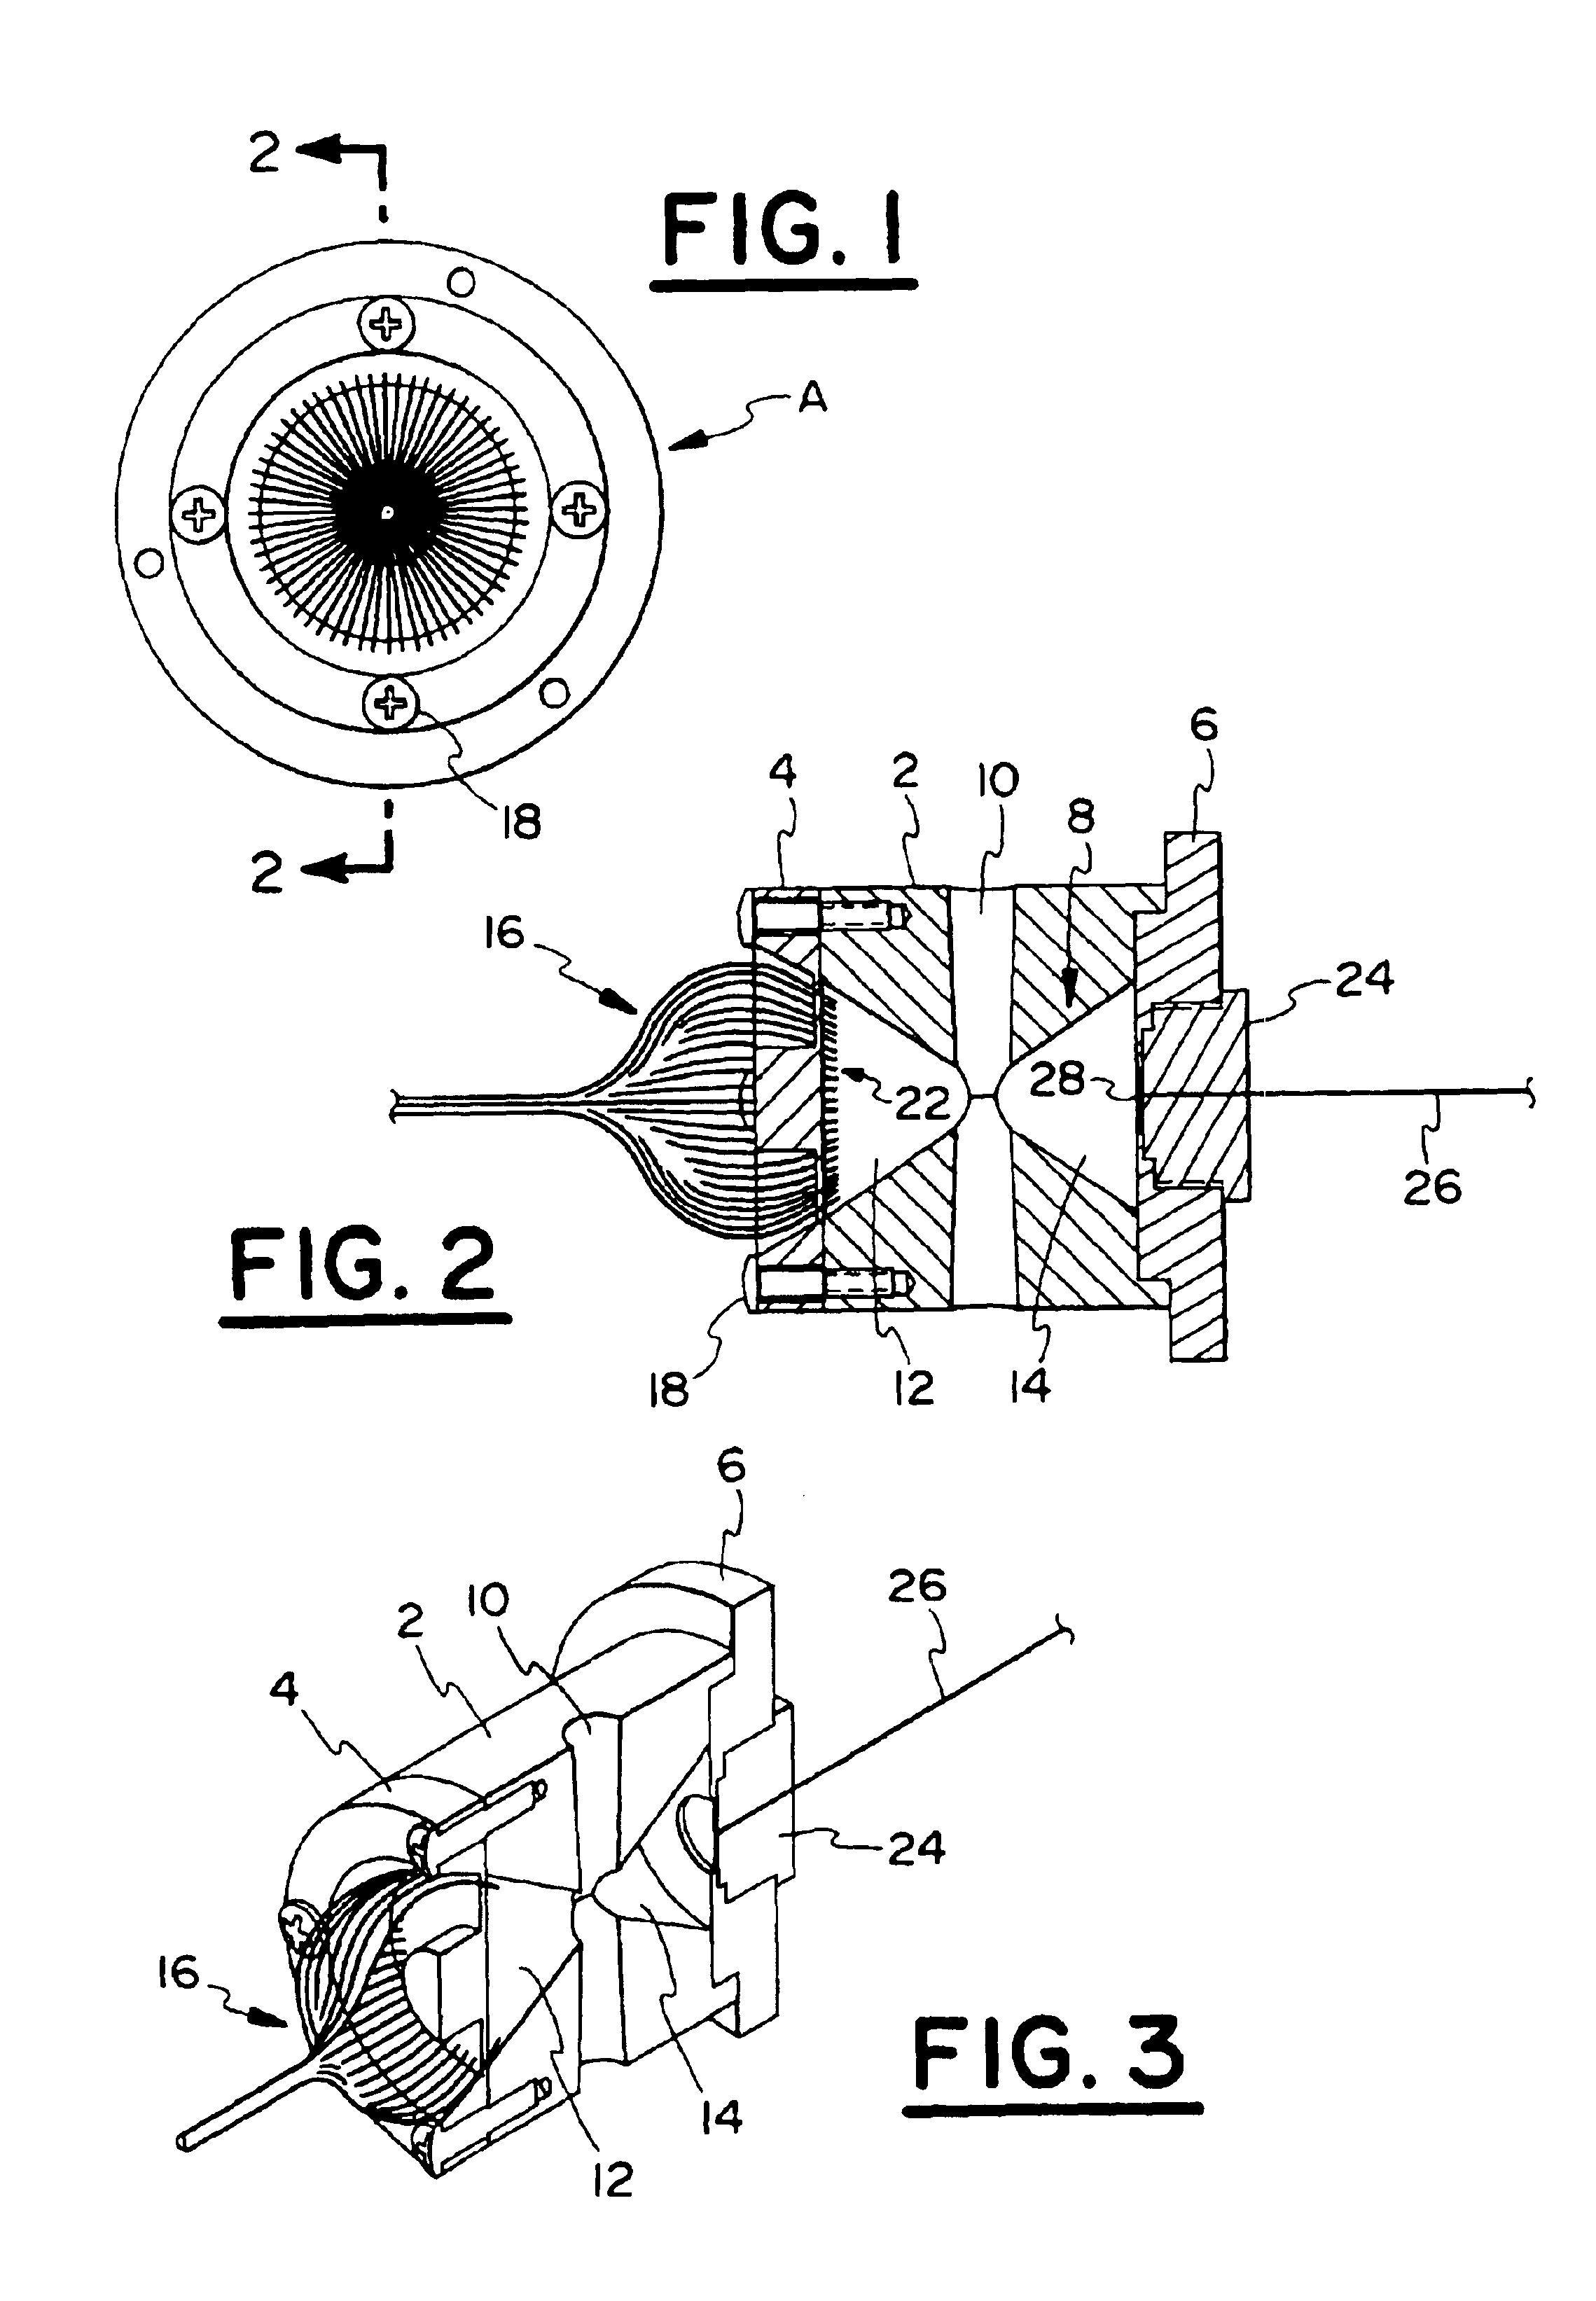 Apparatus and process for analyzing a stream of fluid